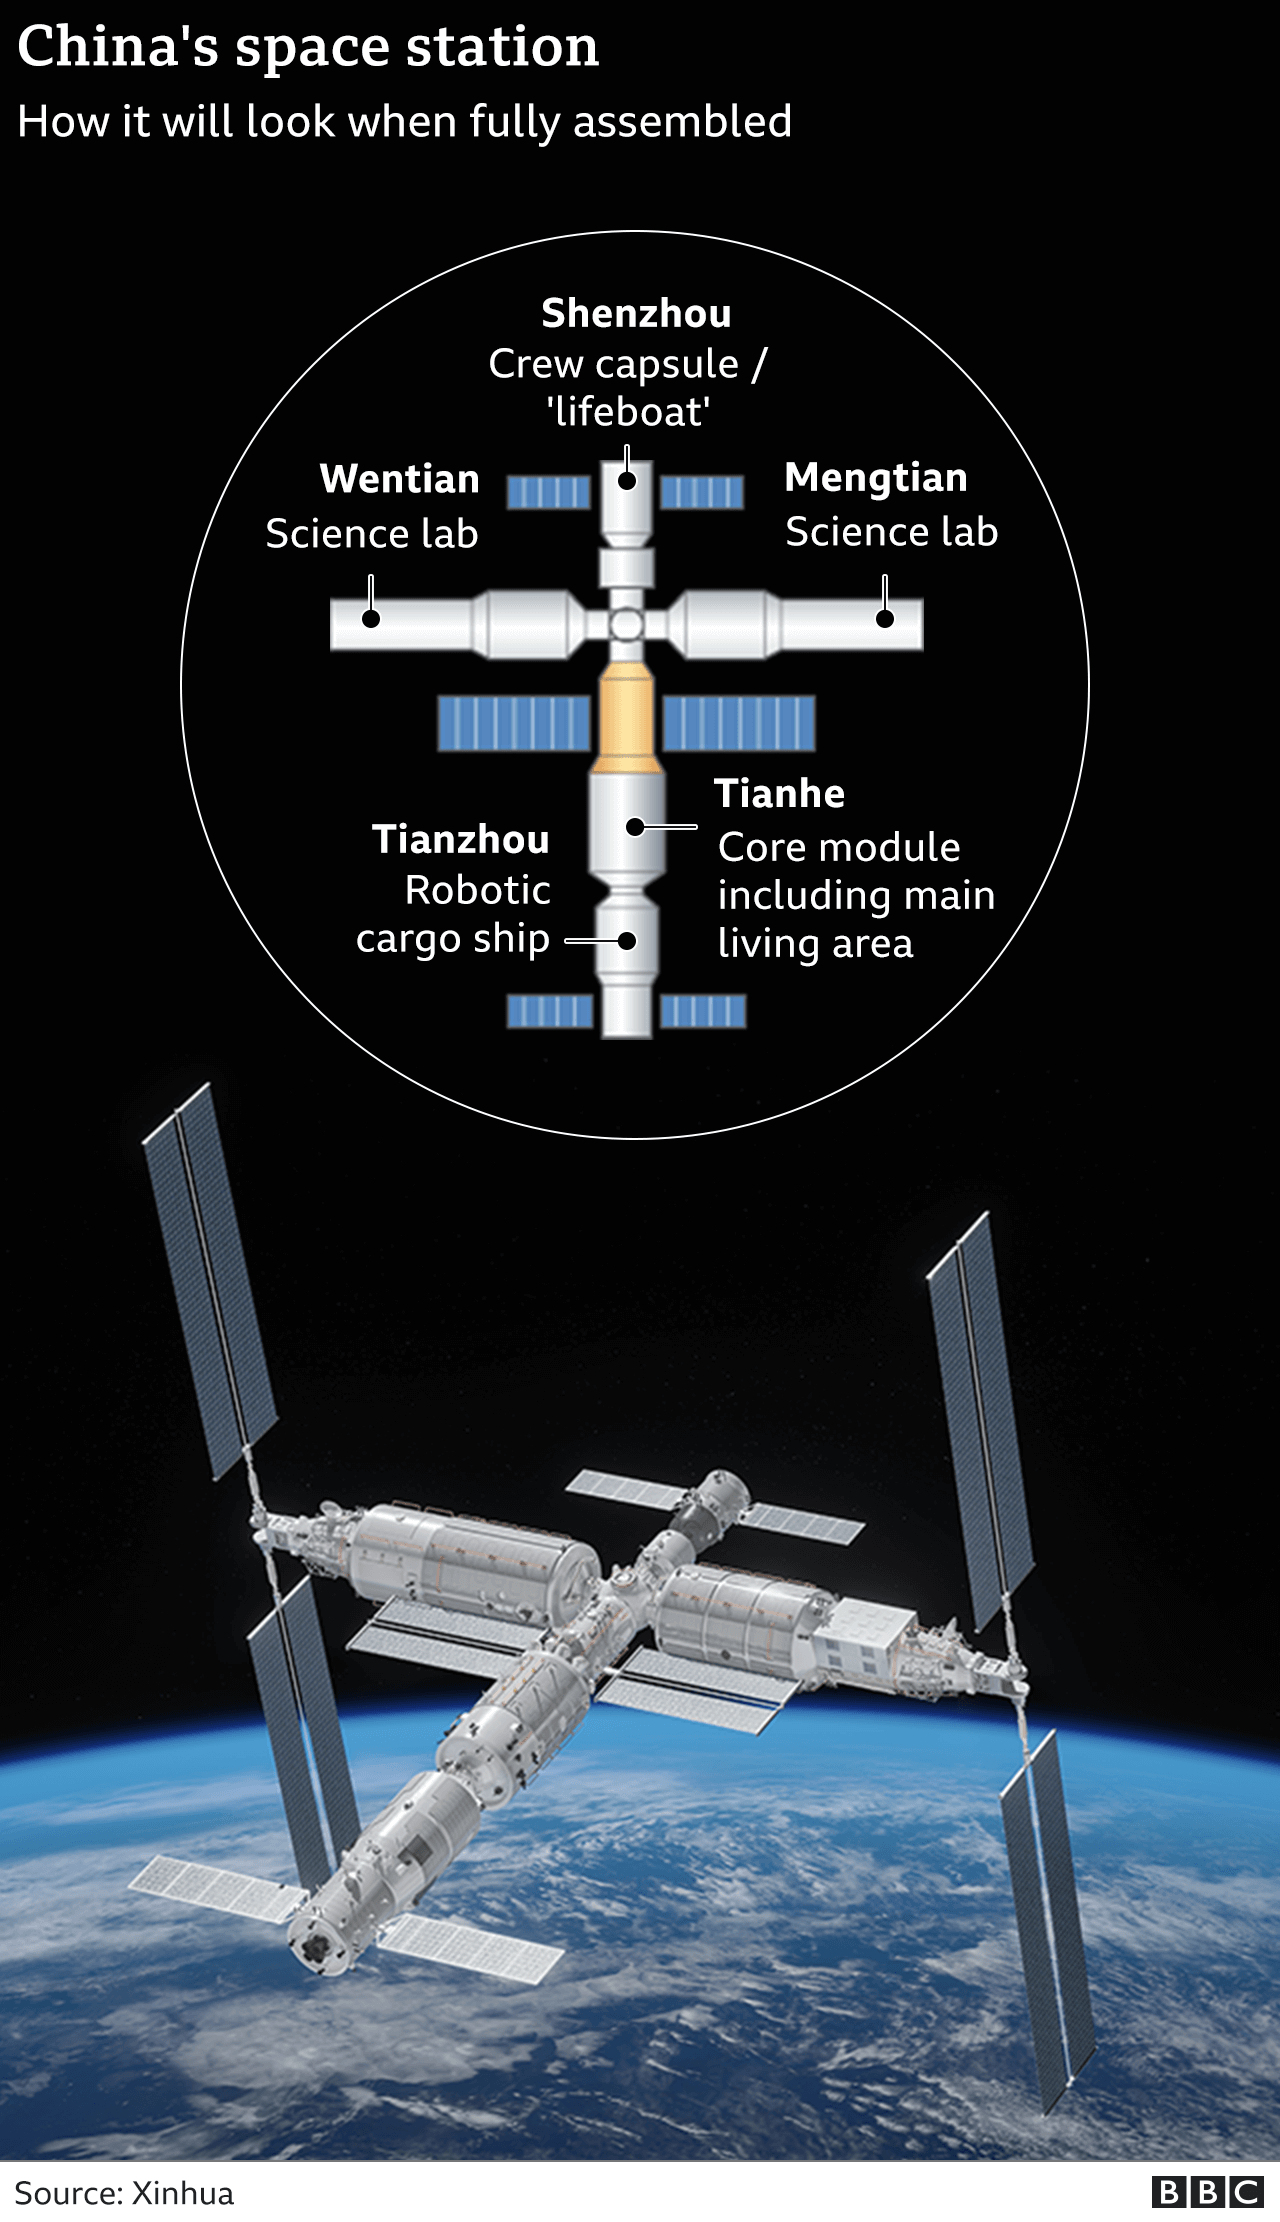 Graphic showing key elements of China's space station